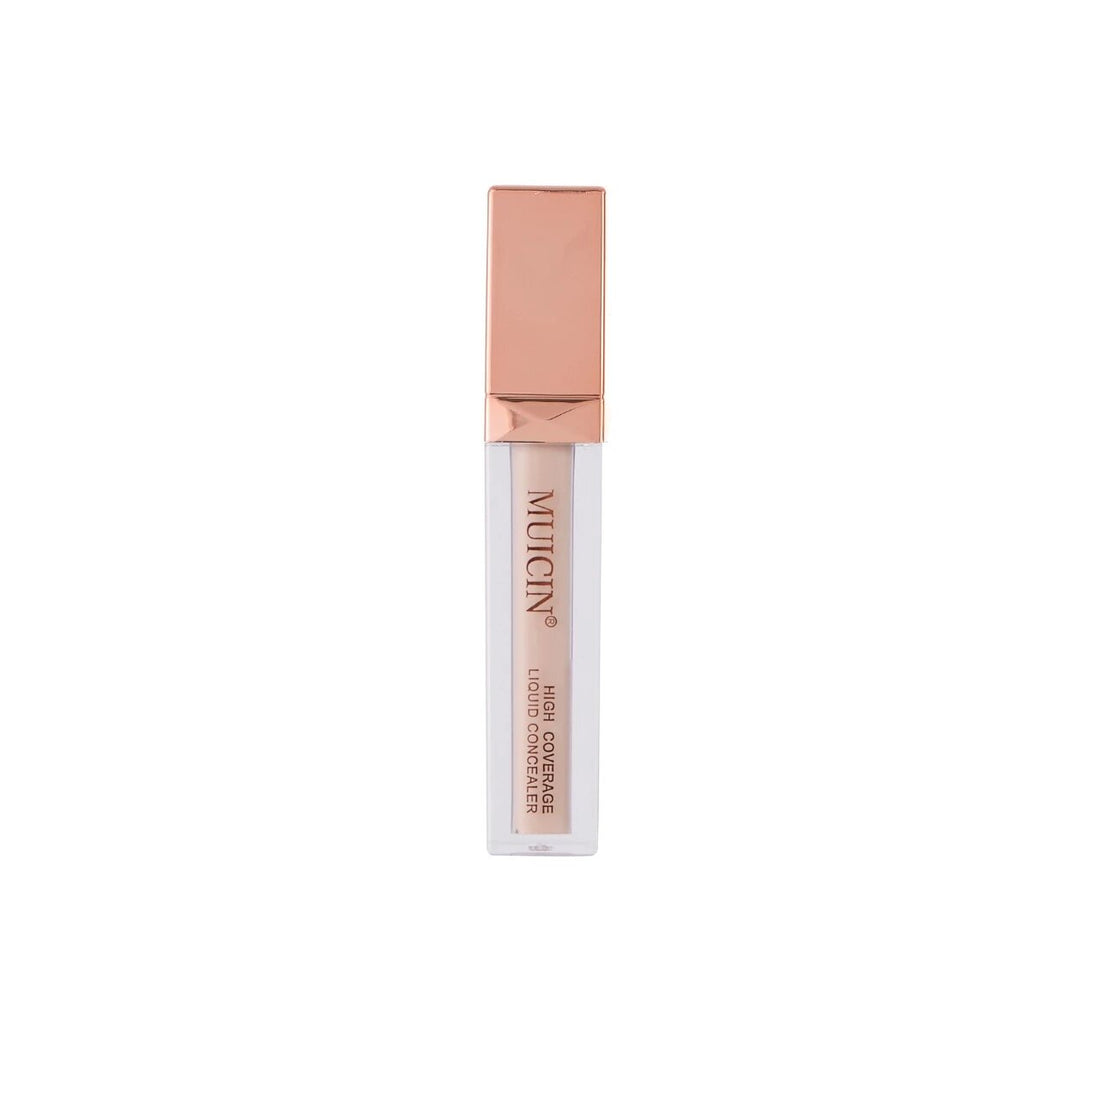 Gold Hd Coverage Liquid Concealer - 6G Nude